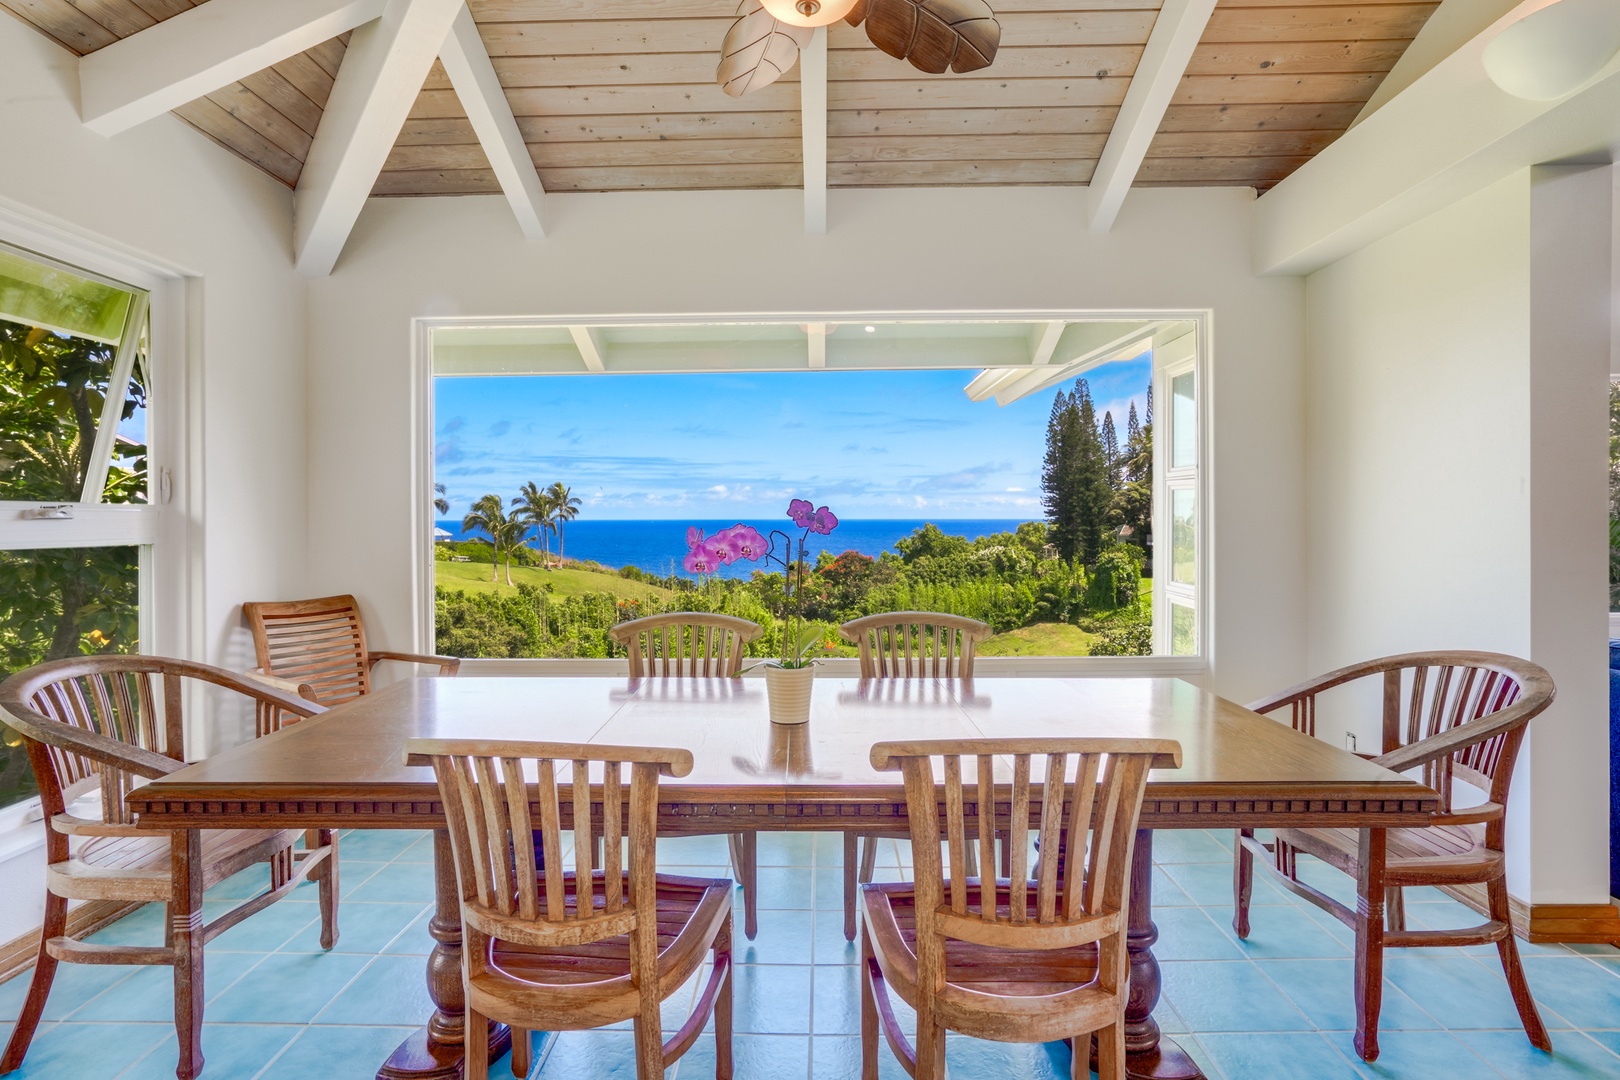 Princeville Vacation Rentals, Wai Lani - Dining transcends the ordinary here, where panoramic views add a touch of magic to every meal.